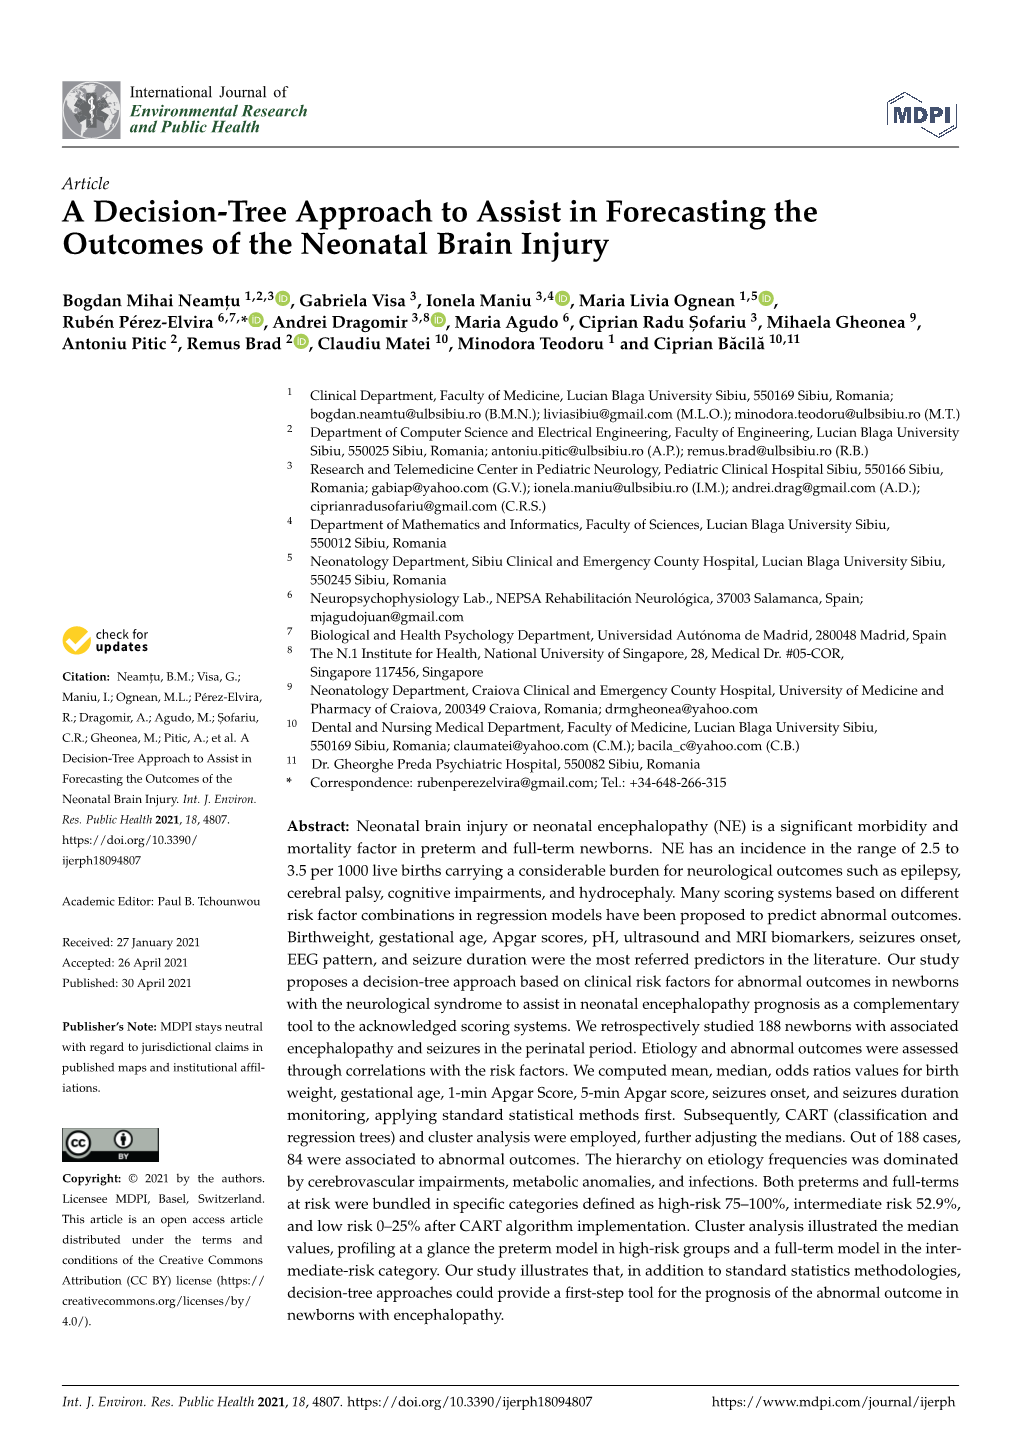 A Decision-Tree Approach to Assist in Forecasting the Outcomes of the Neonatal Brain Injury